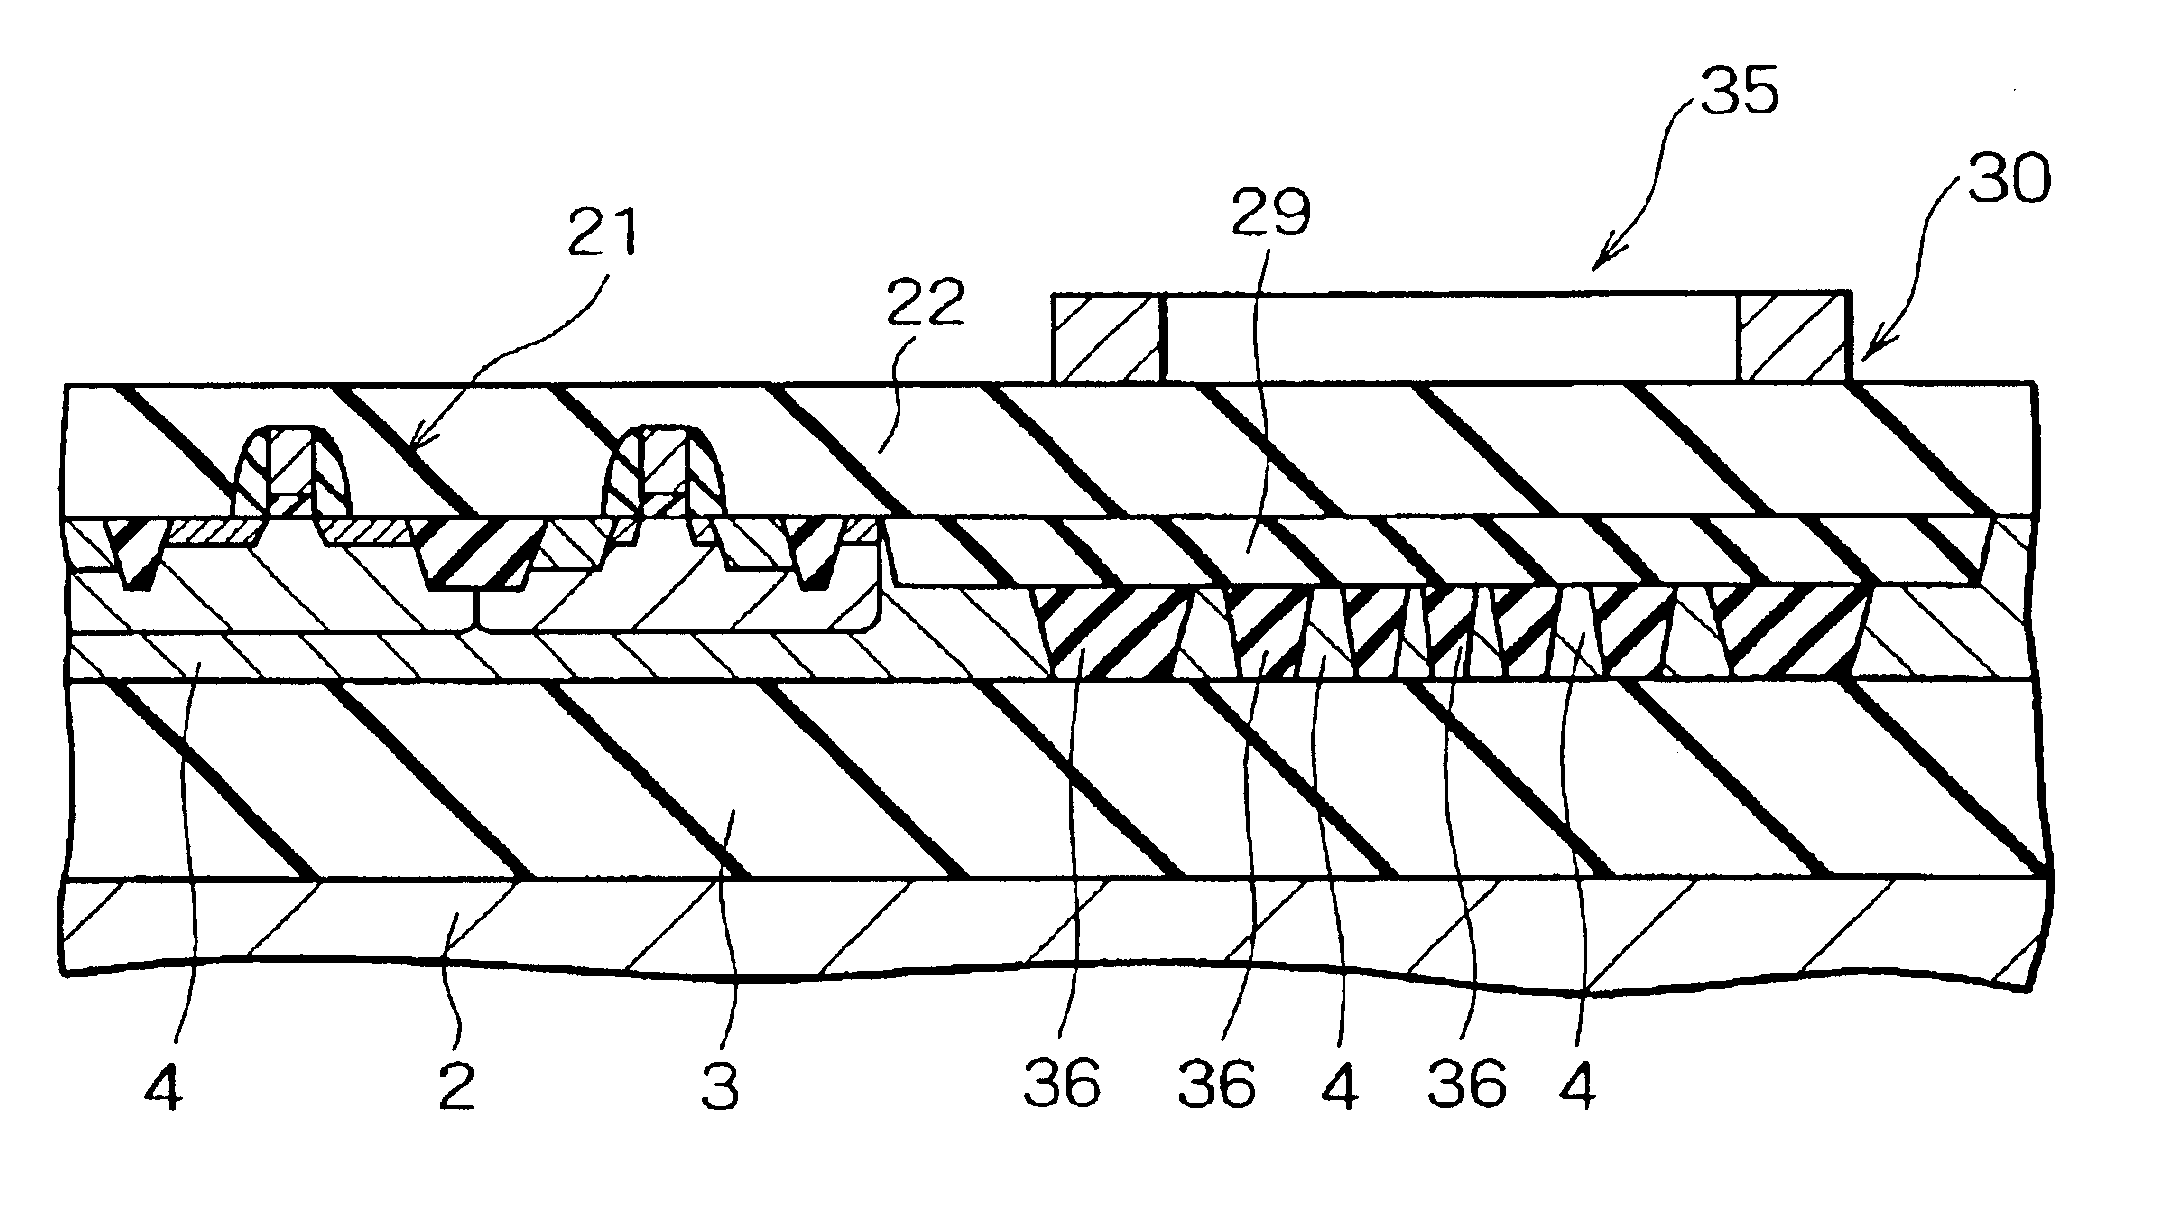 Integrated circuit including an inductor, active layers with isolation dielectrics, and multiple insulation layers